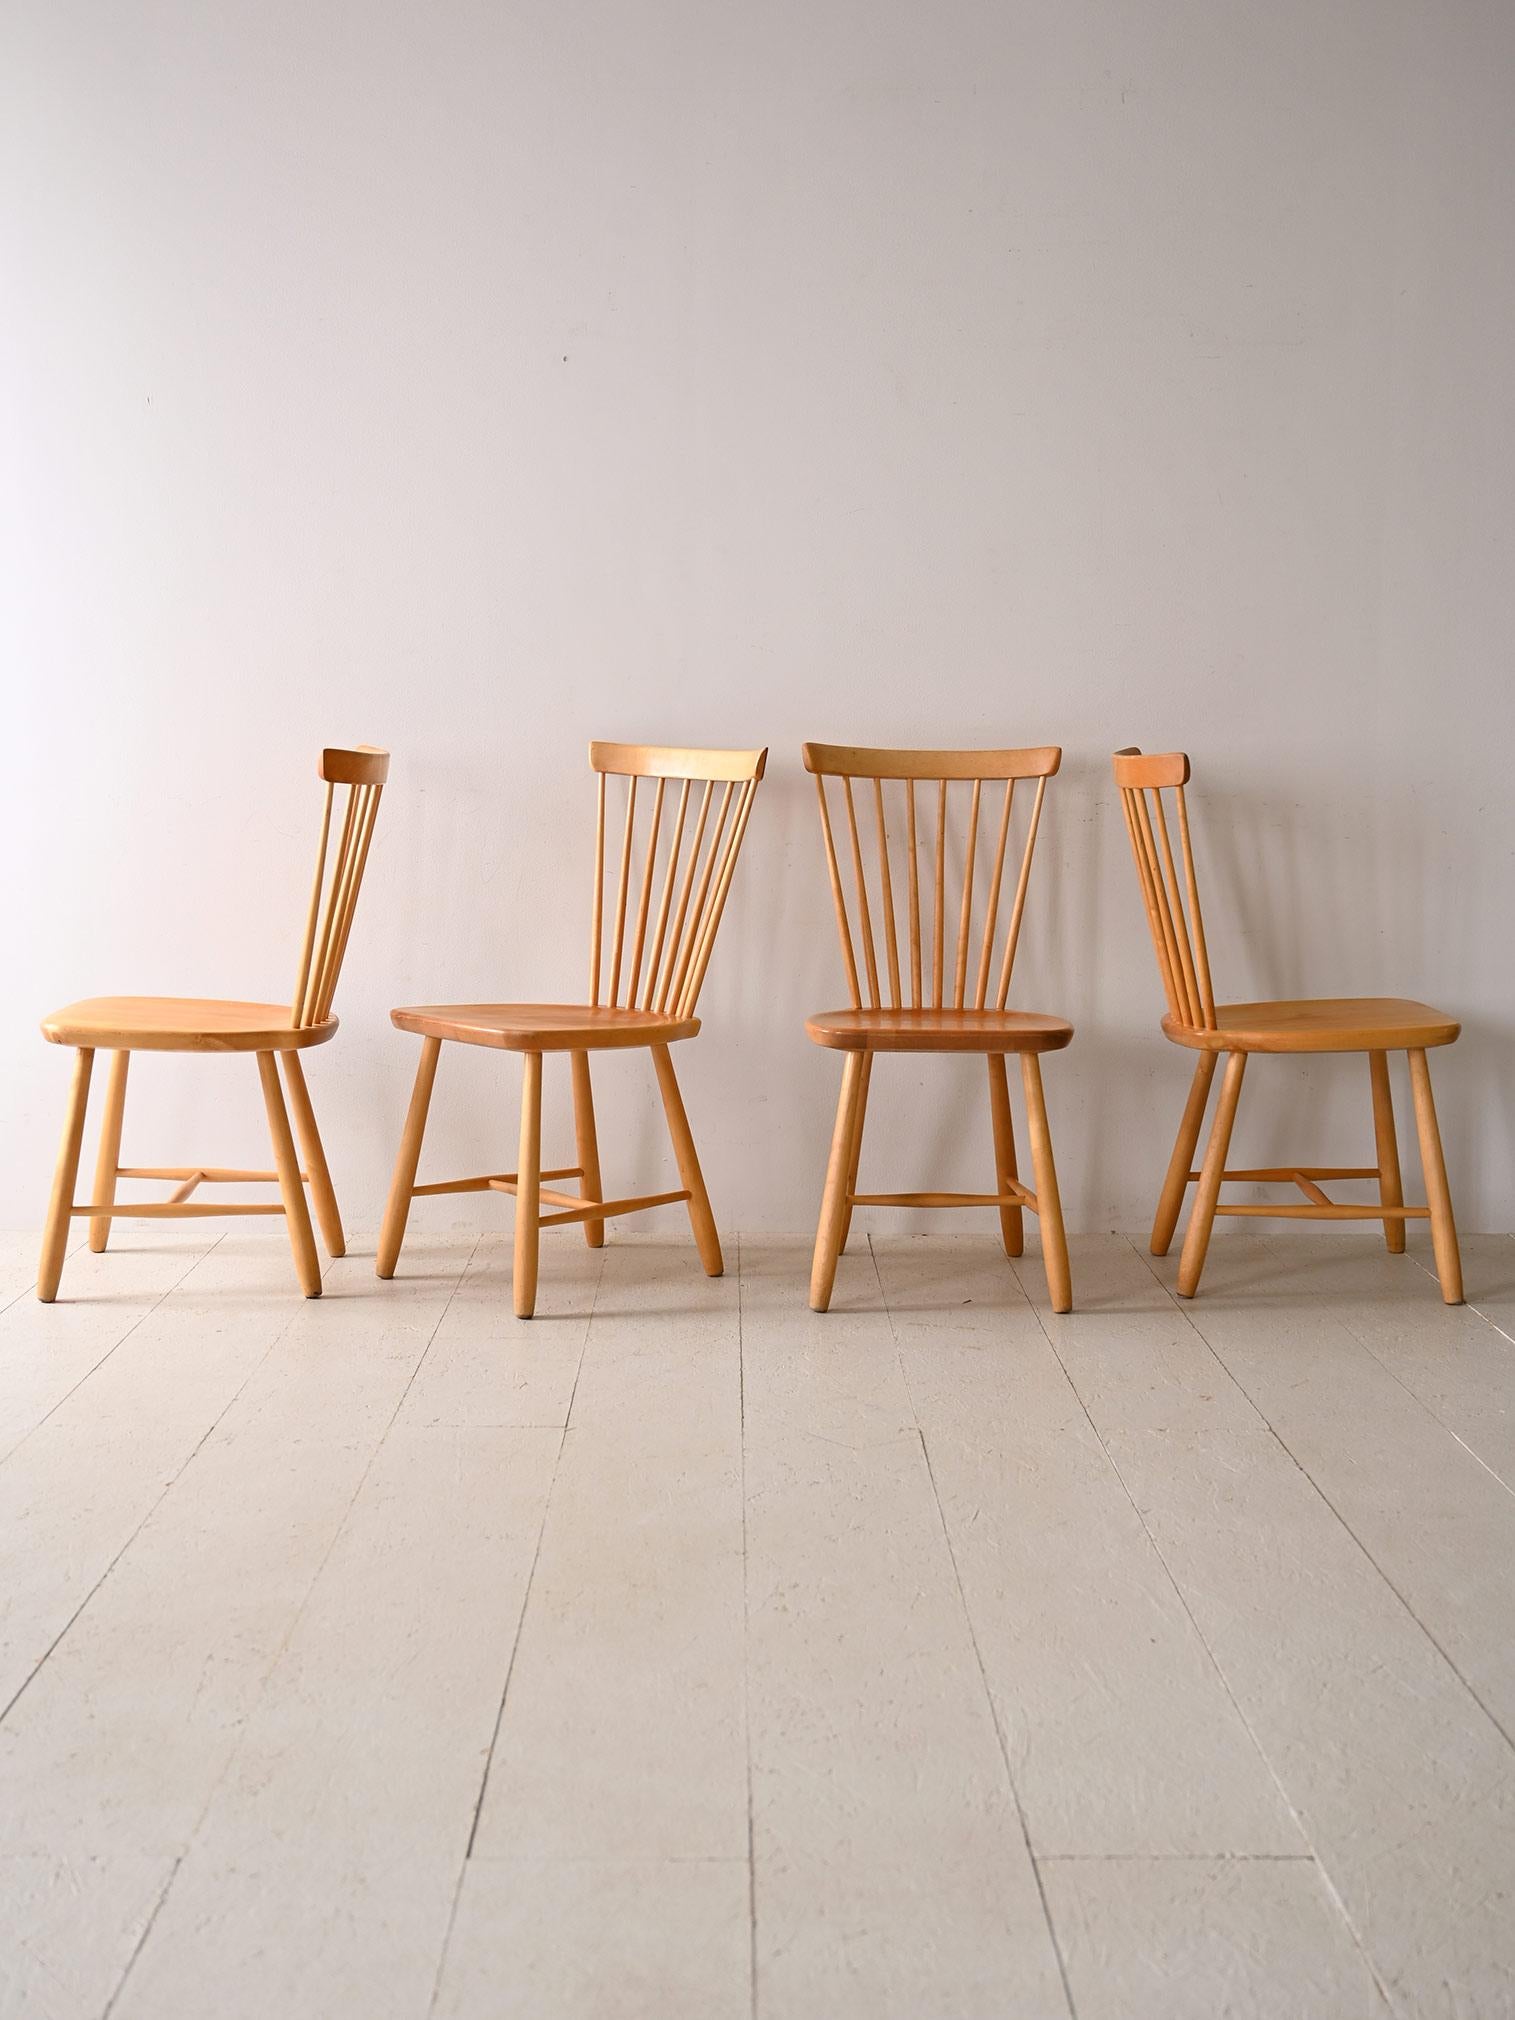 Original vintage Scandinavian dining chairs.

This chair model that has become iconic is distinguished by its unique backrest structure consisting of eight vertical wooden stems. The tapered, elongated legs recall the understated, minimalist style